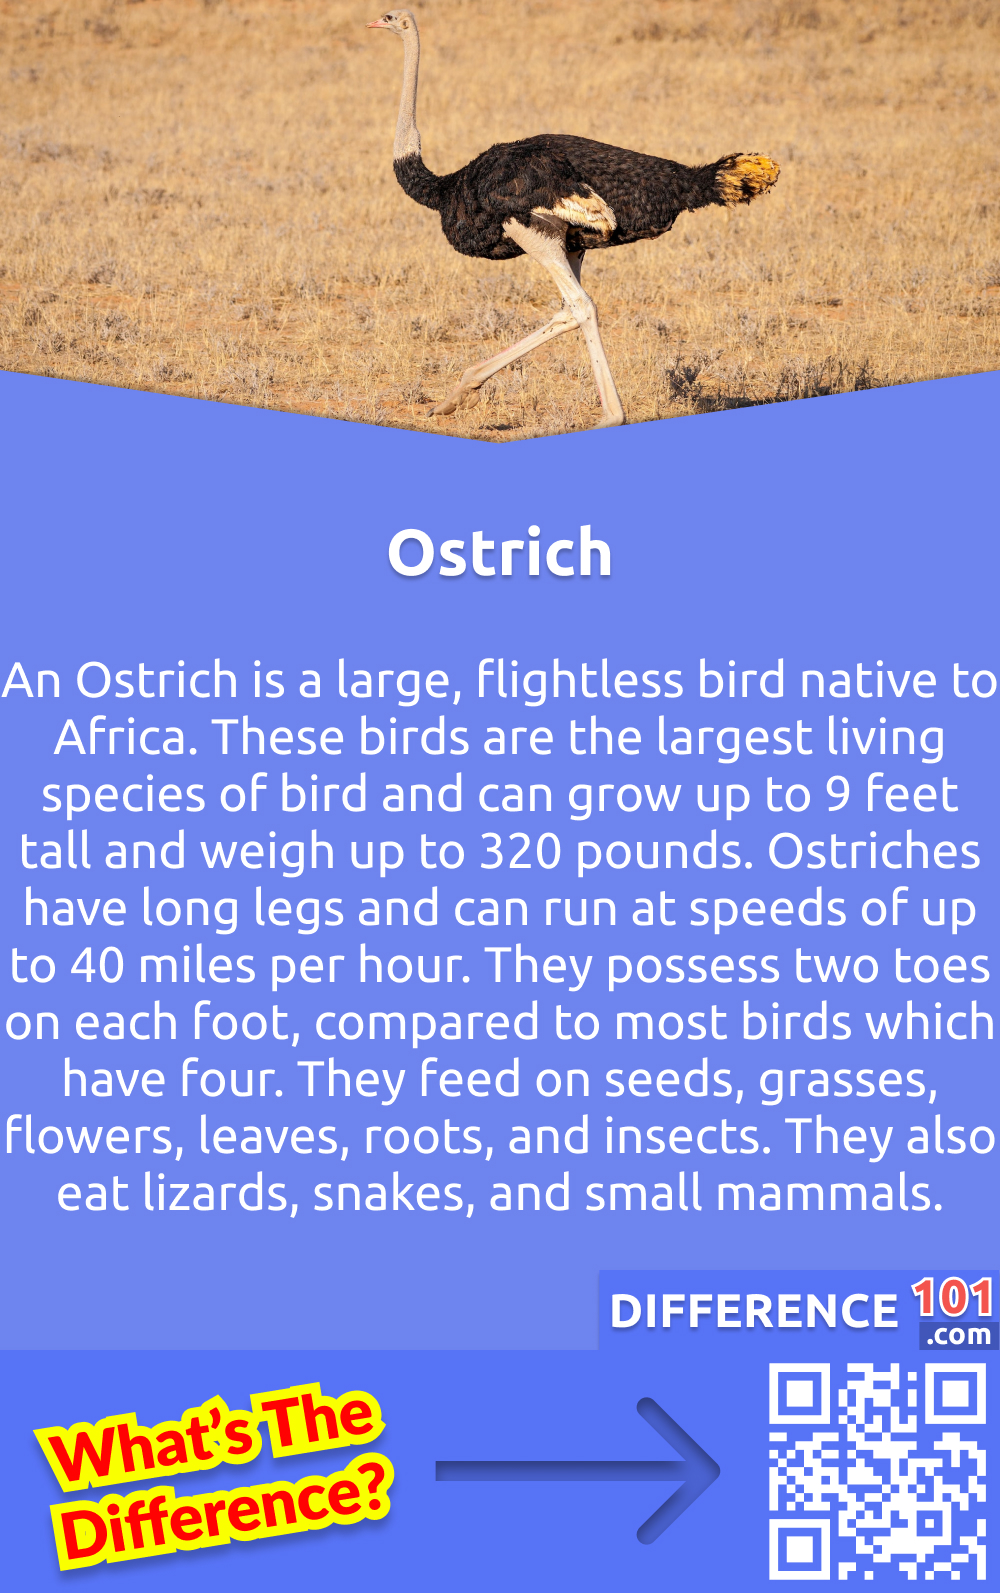 What Is Ostrich? An ostrich is a large, flightless bird native to Africa. These birds are the largest living species of bird and can grow up to 9 feet tall and weigh up to 320 pounds. Ostriches have long legs and can run at speeds of up to 40 miles per hour. They possess two toes on each foot, compared to most birds which have four. Ostriches are omnivores, consuming a wide range of plant and animal material. They feed on seeds, grasses, flowers, leaves, roots, and insects. They also eat lizards, snakes, and small mammals. Ostriches are social animals that live in groups of 5 to 50 birds. They display complex behaviors including mating rituals and aggression. In the wild, their lifespan is estimated at up to 40 years. In captivity, they may live even longer. Ostriches have long been kept as livestock.